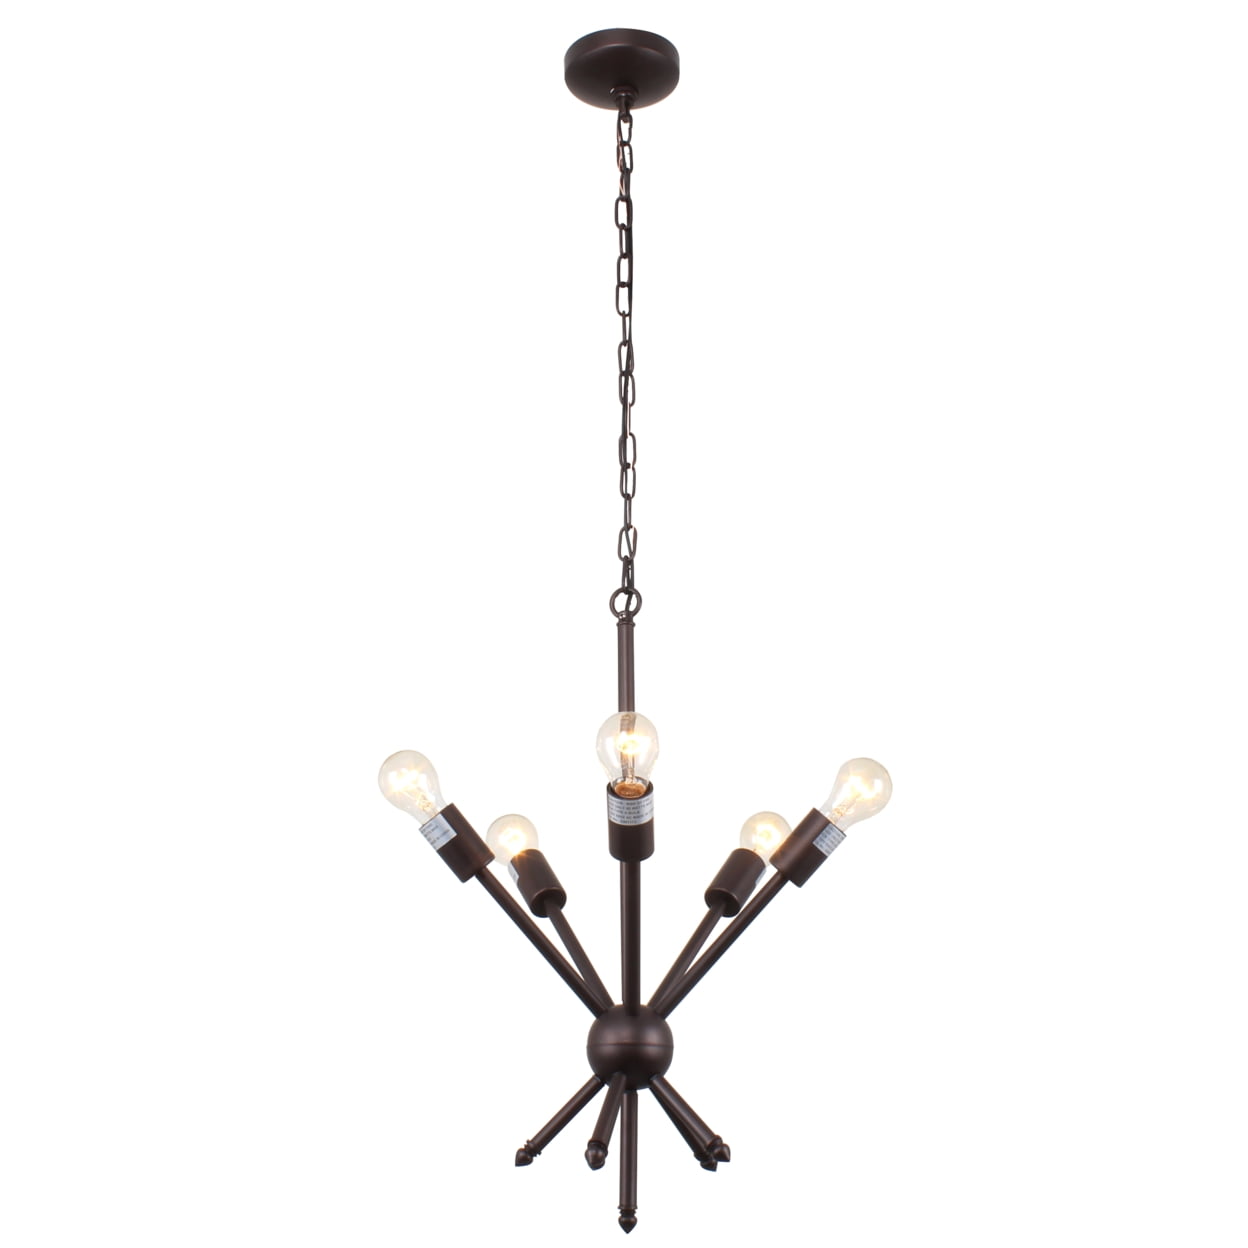 Ch7s052rb21-up5 Freya Transitional 5 Light Rubbed Bronze Ceiling Pendant - 16 In.